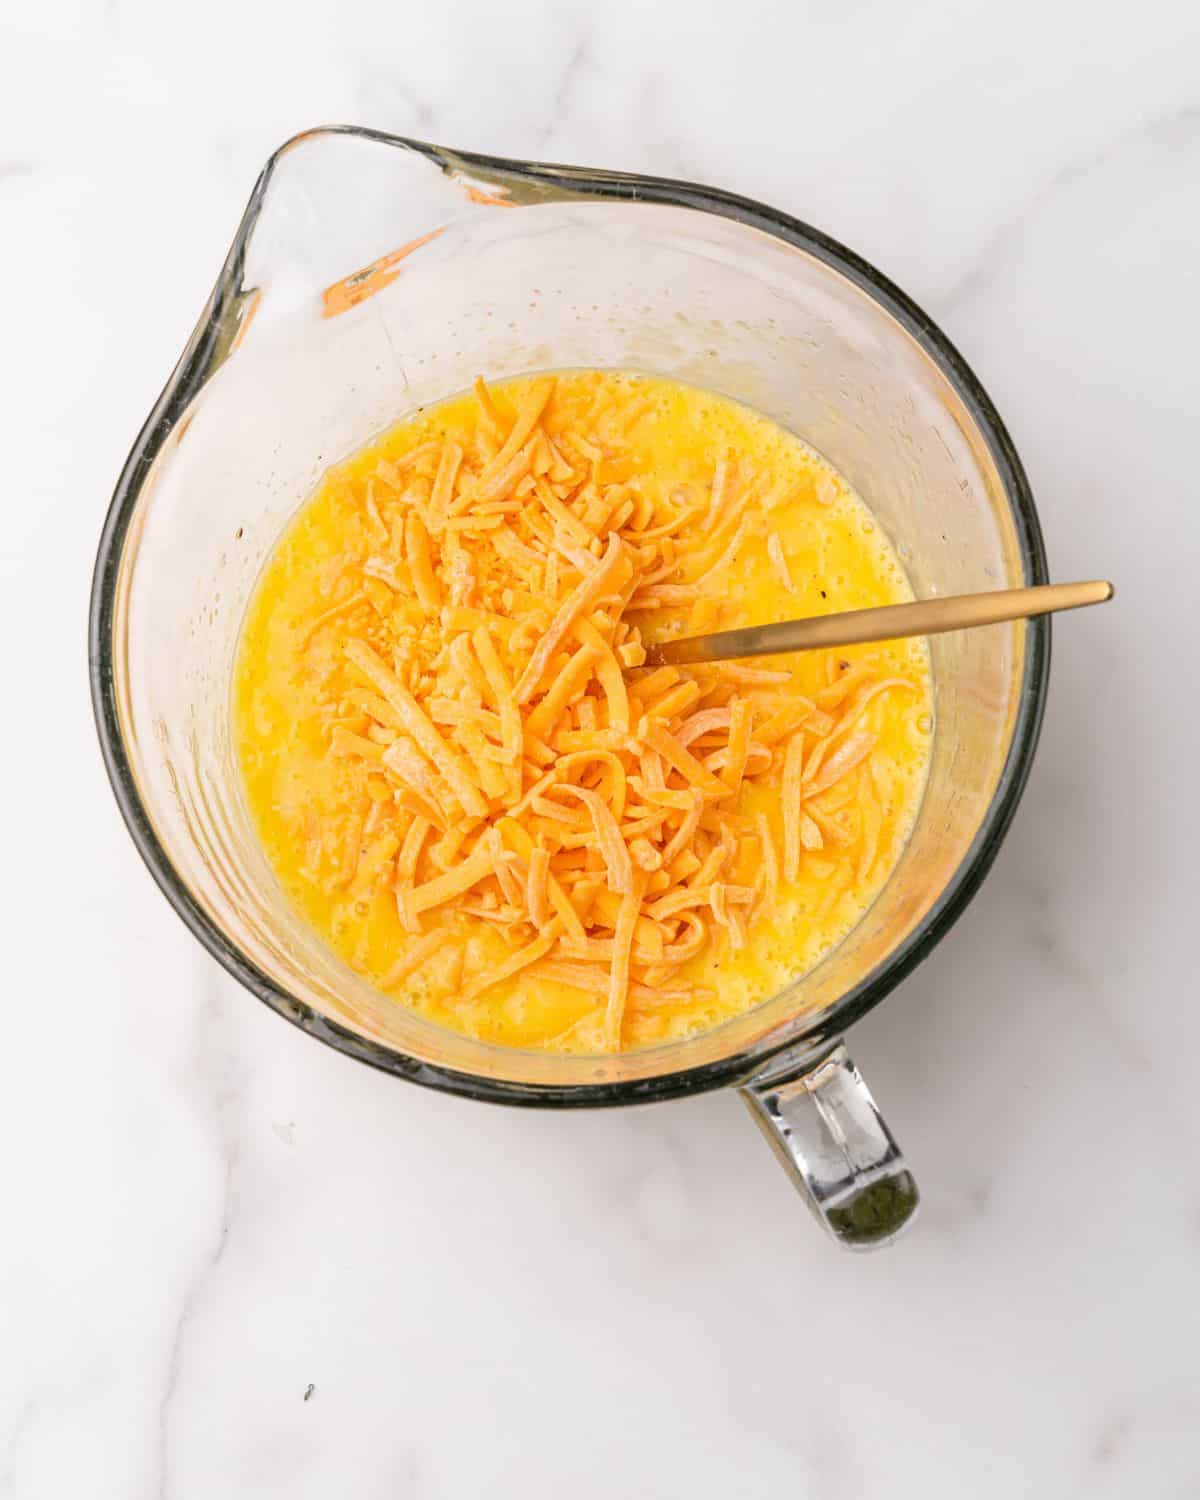 shredded cheese in the bowl with the egg mixture.